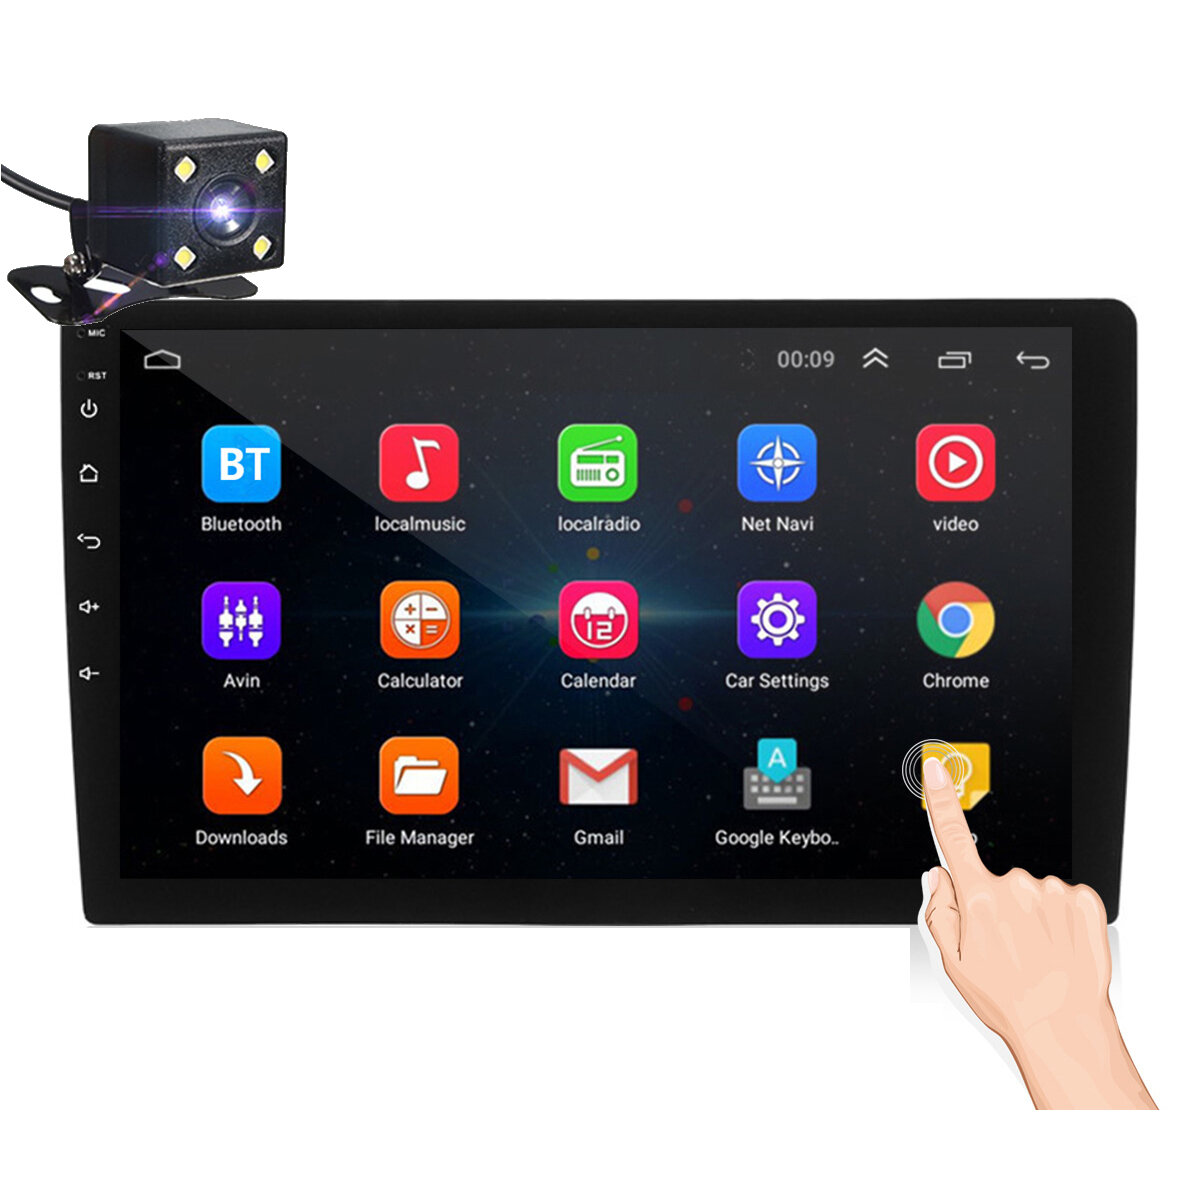 iMars 10.1Inch 2Din para Android 8.1 Coche Stereo Radio 1 + 16G IPS 2.5D Pantalla táctil Reproductor MP5 GPS WIFI FM con